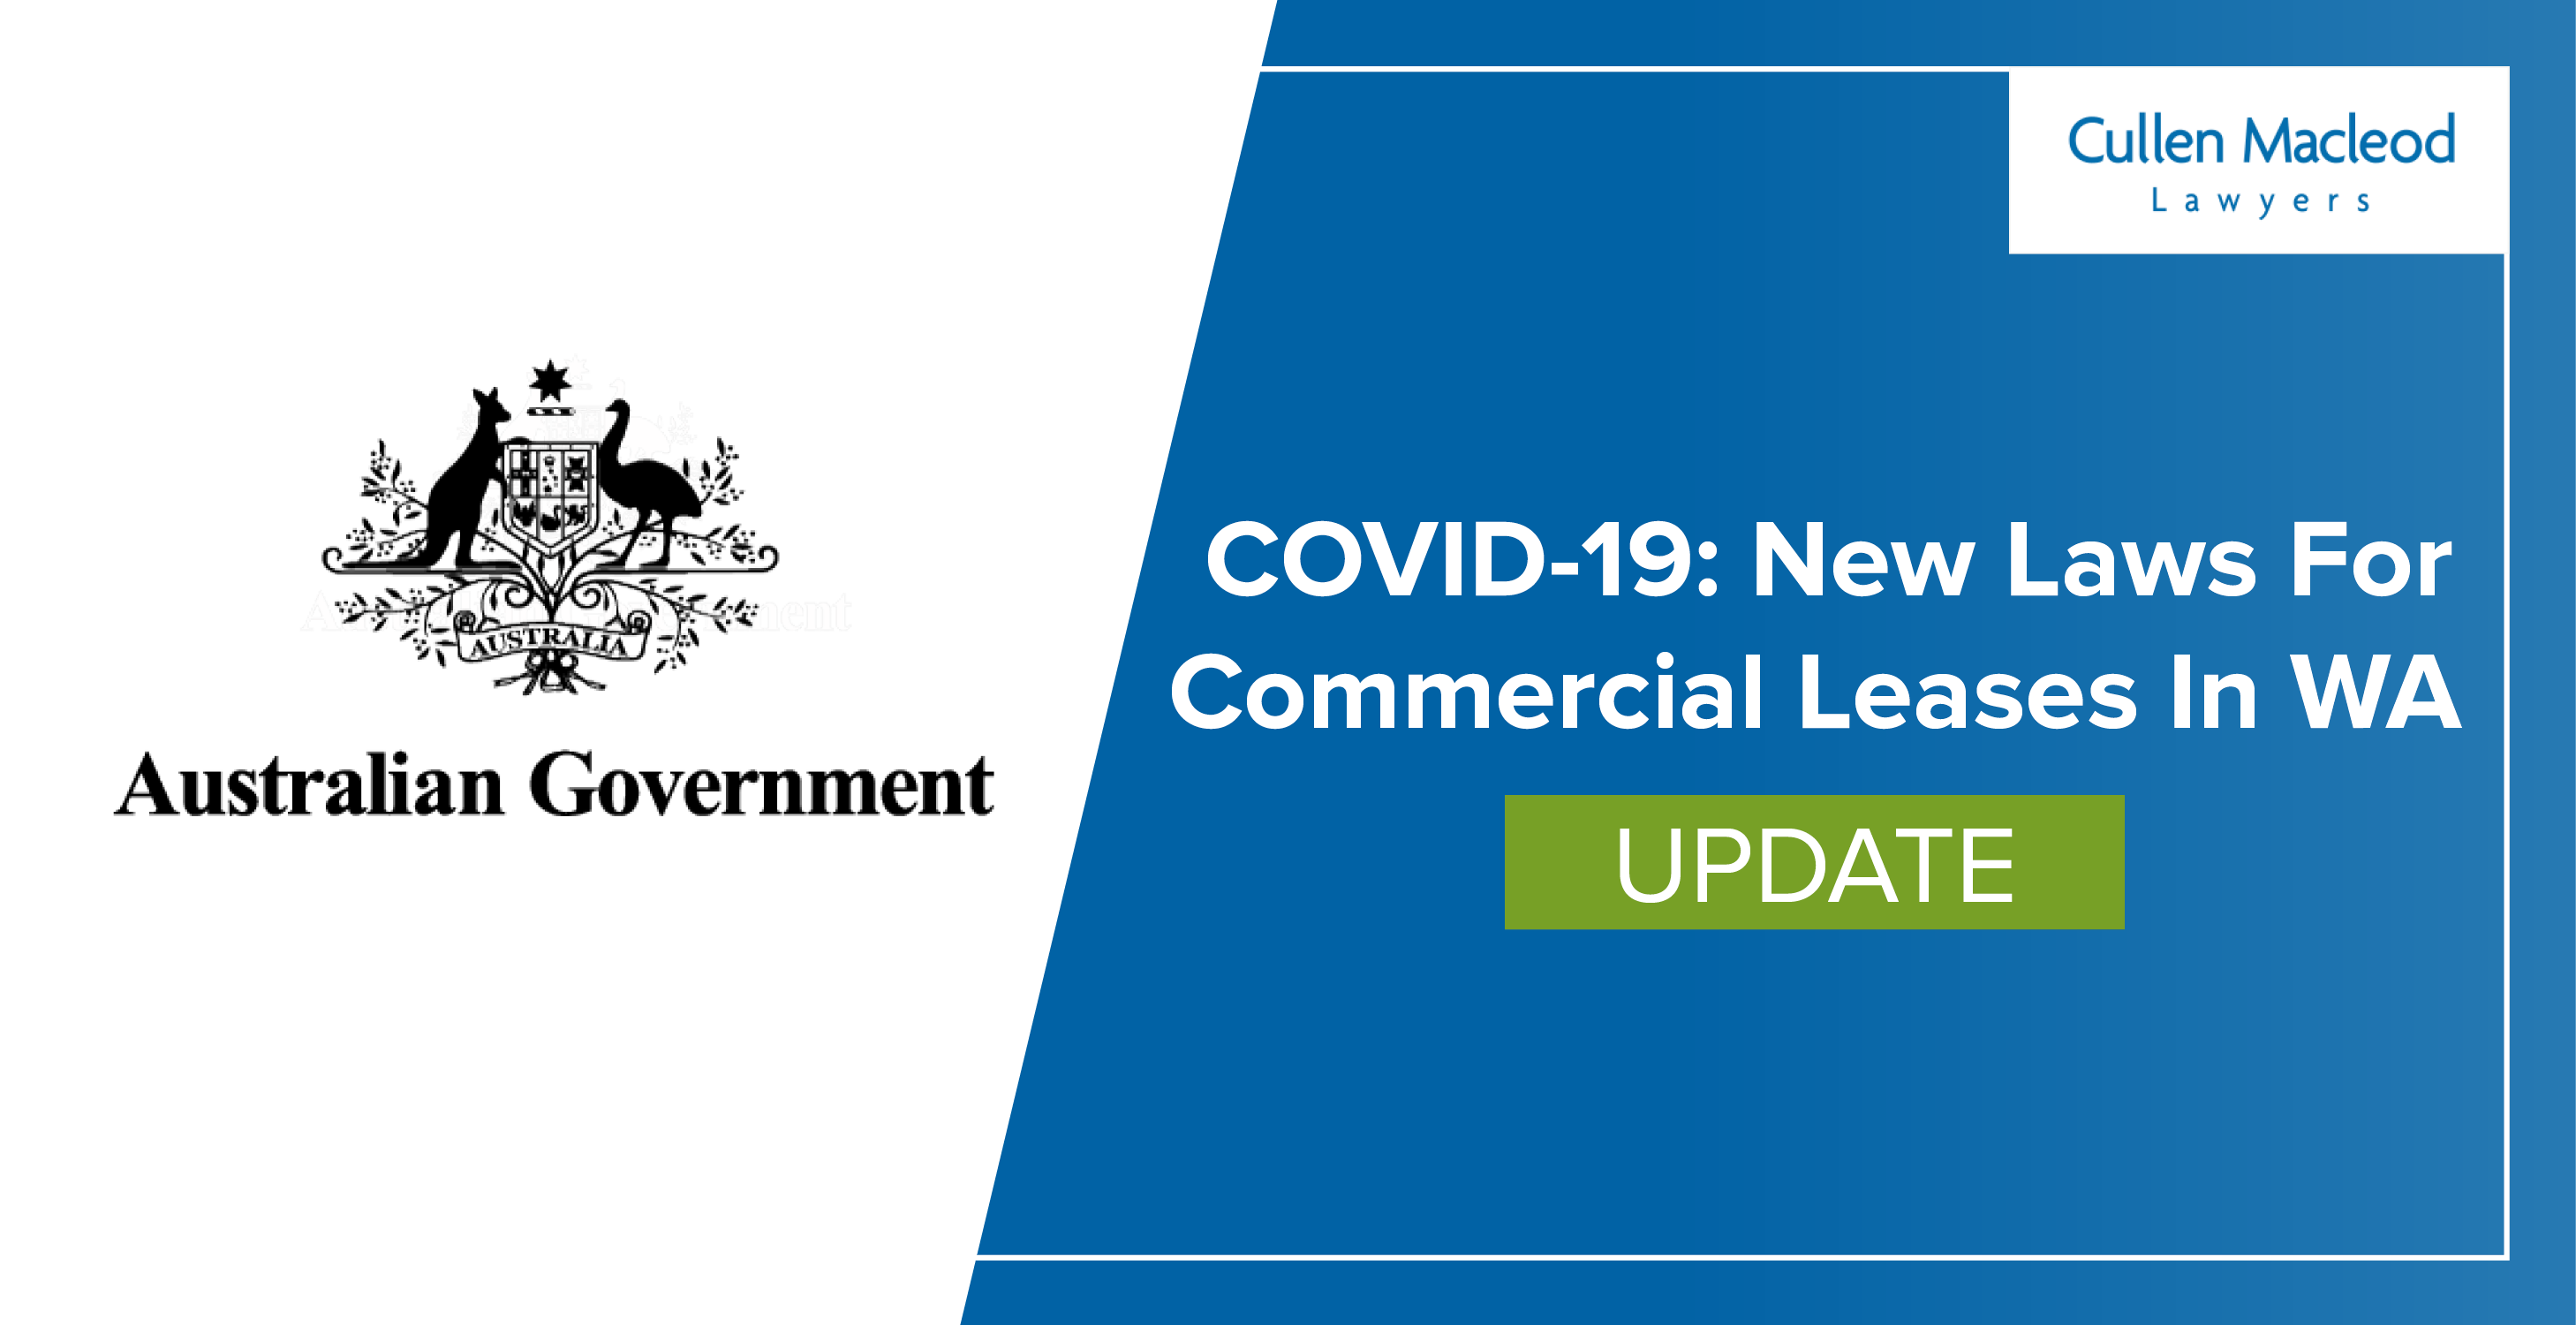 cullen-macleod-blog-feature-image-covid-19-new-laws-for-commercial-leases-in-wa